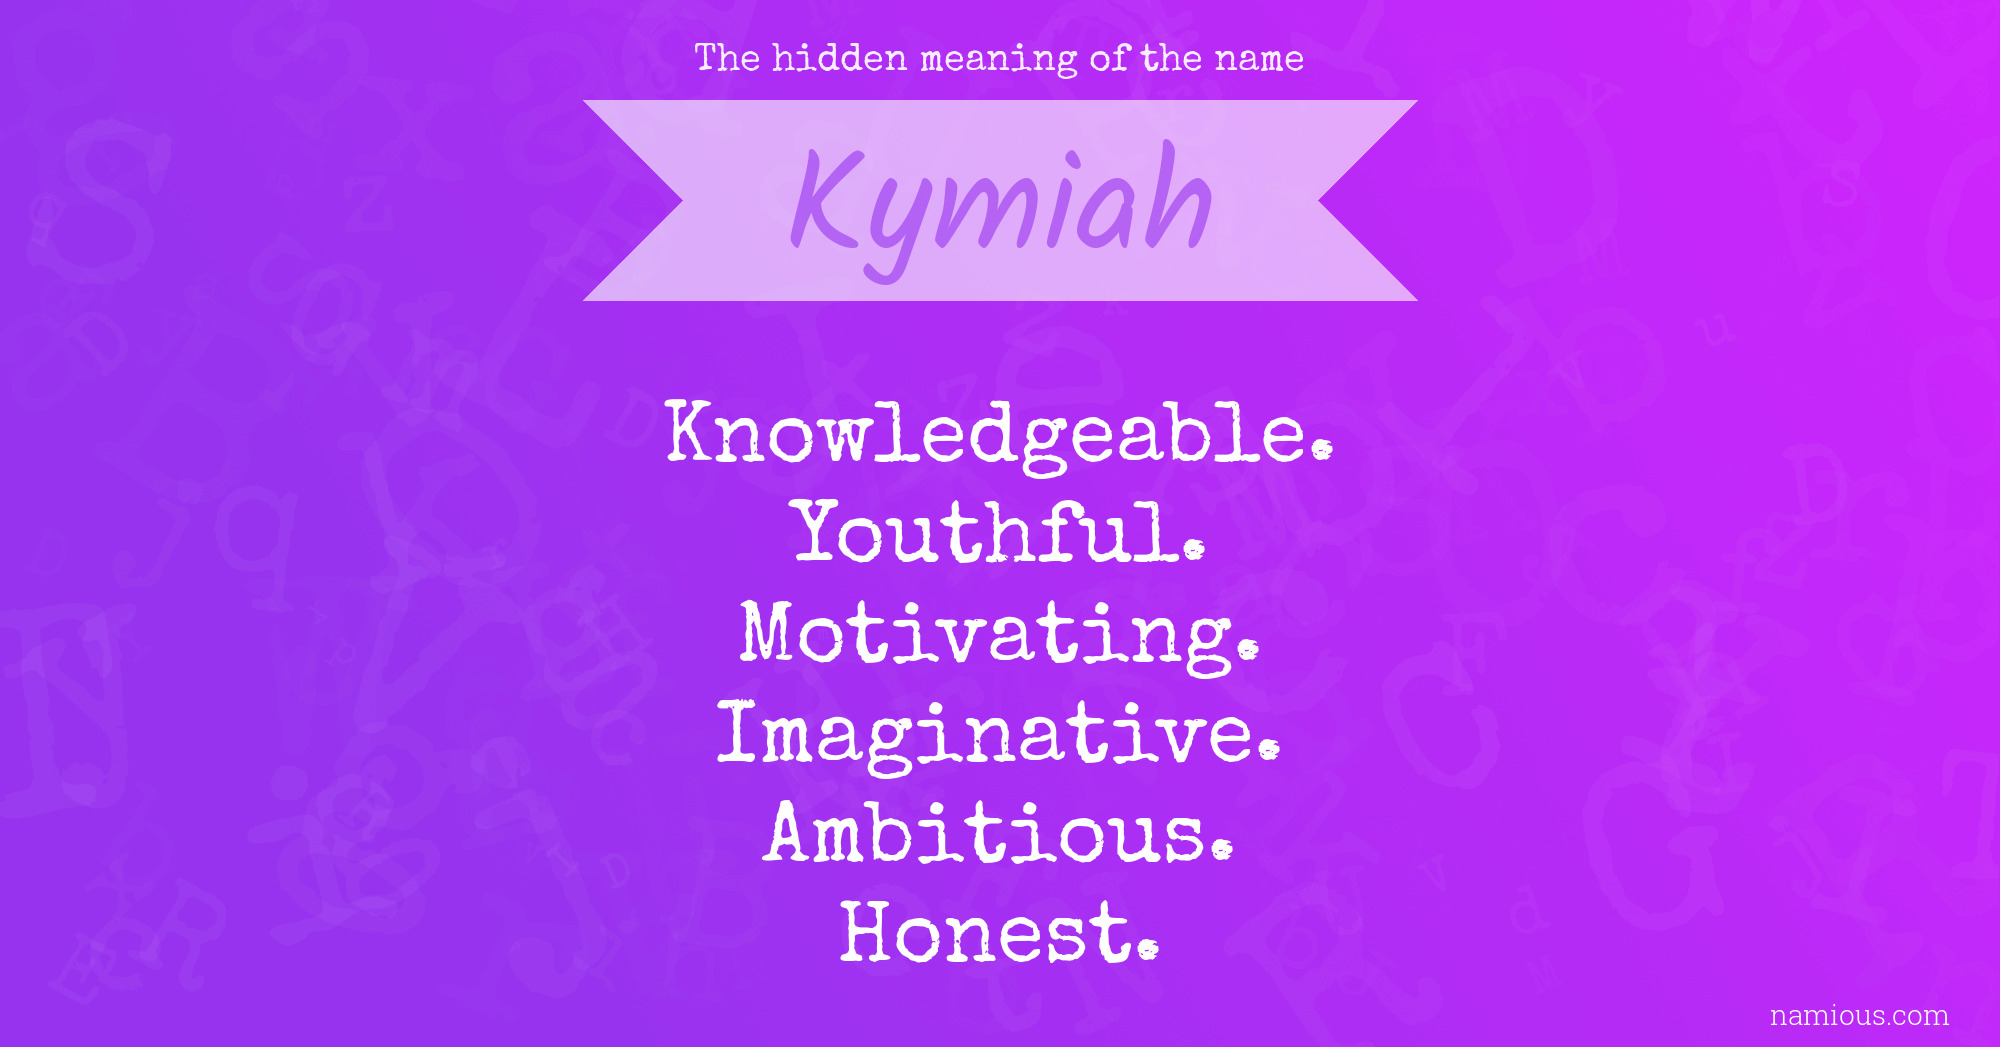 The hidden meaning of the name Kymiah